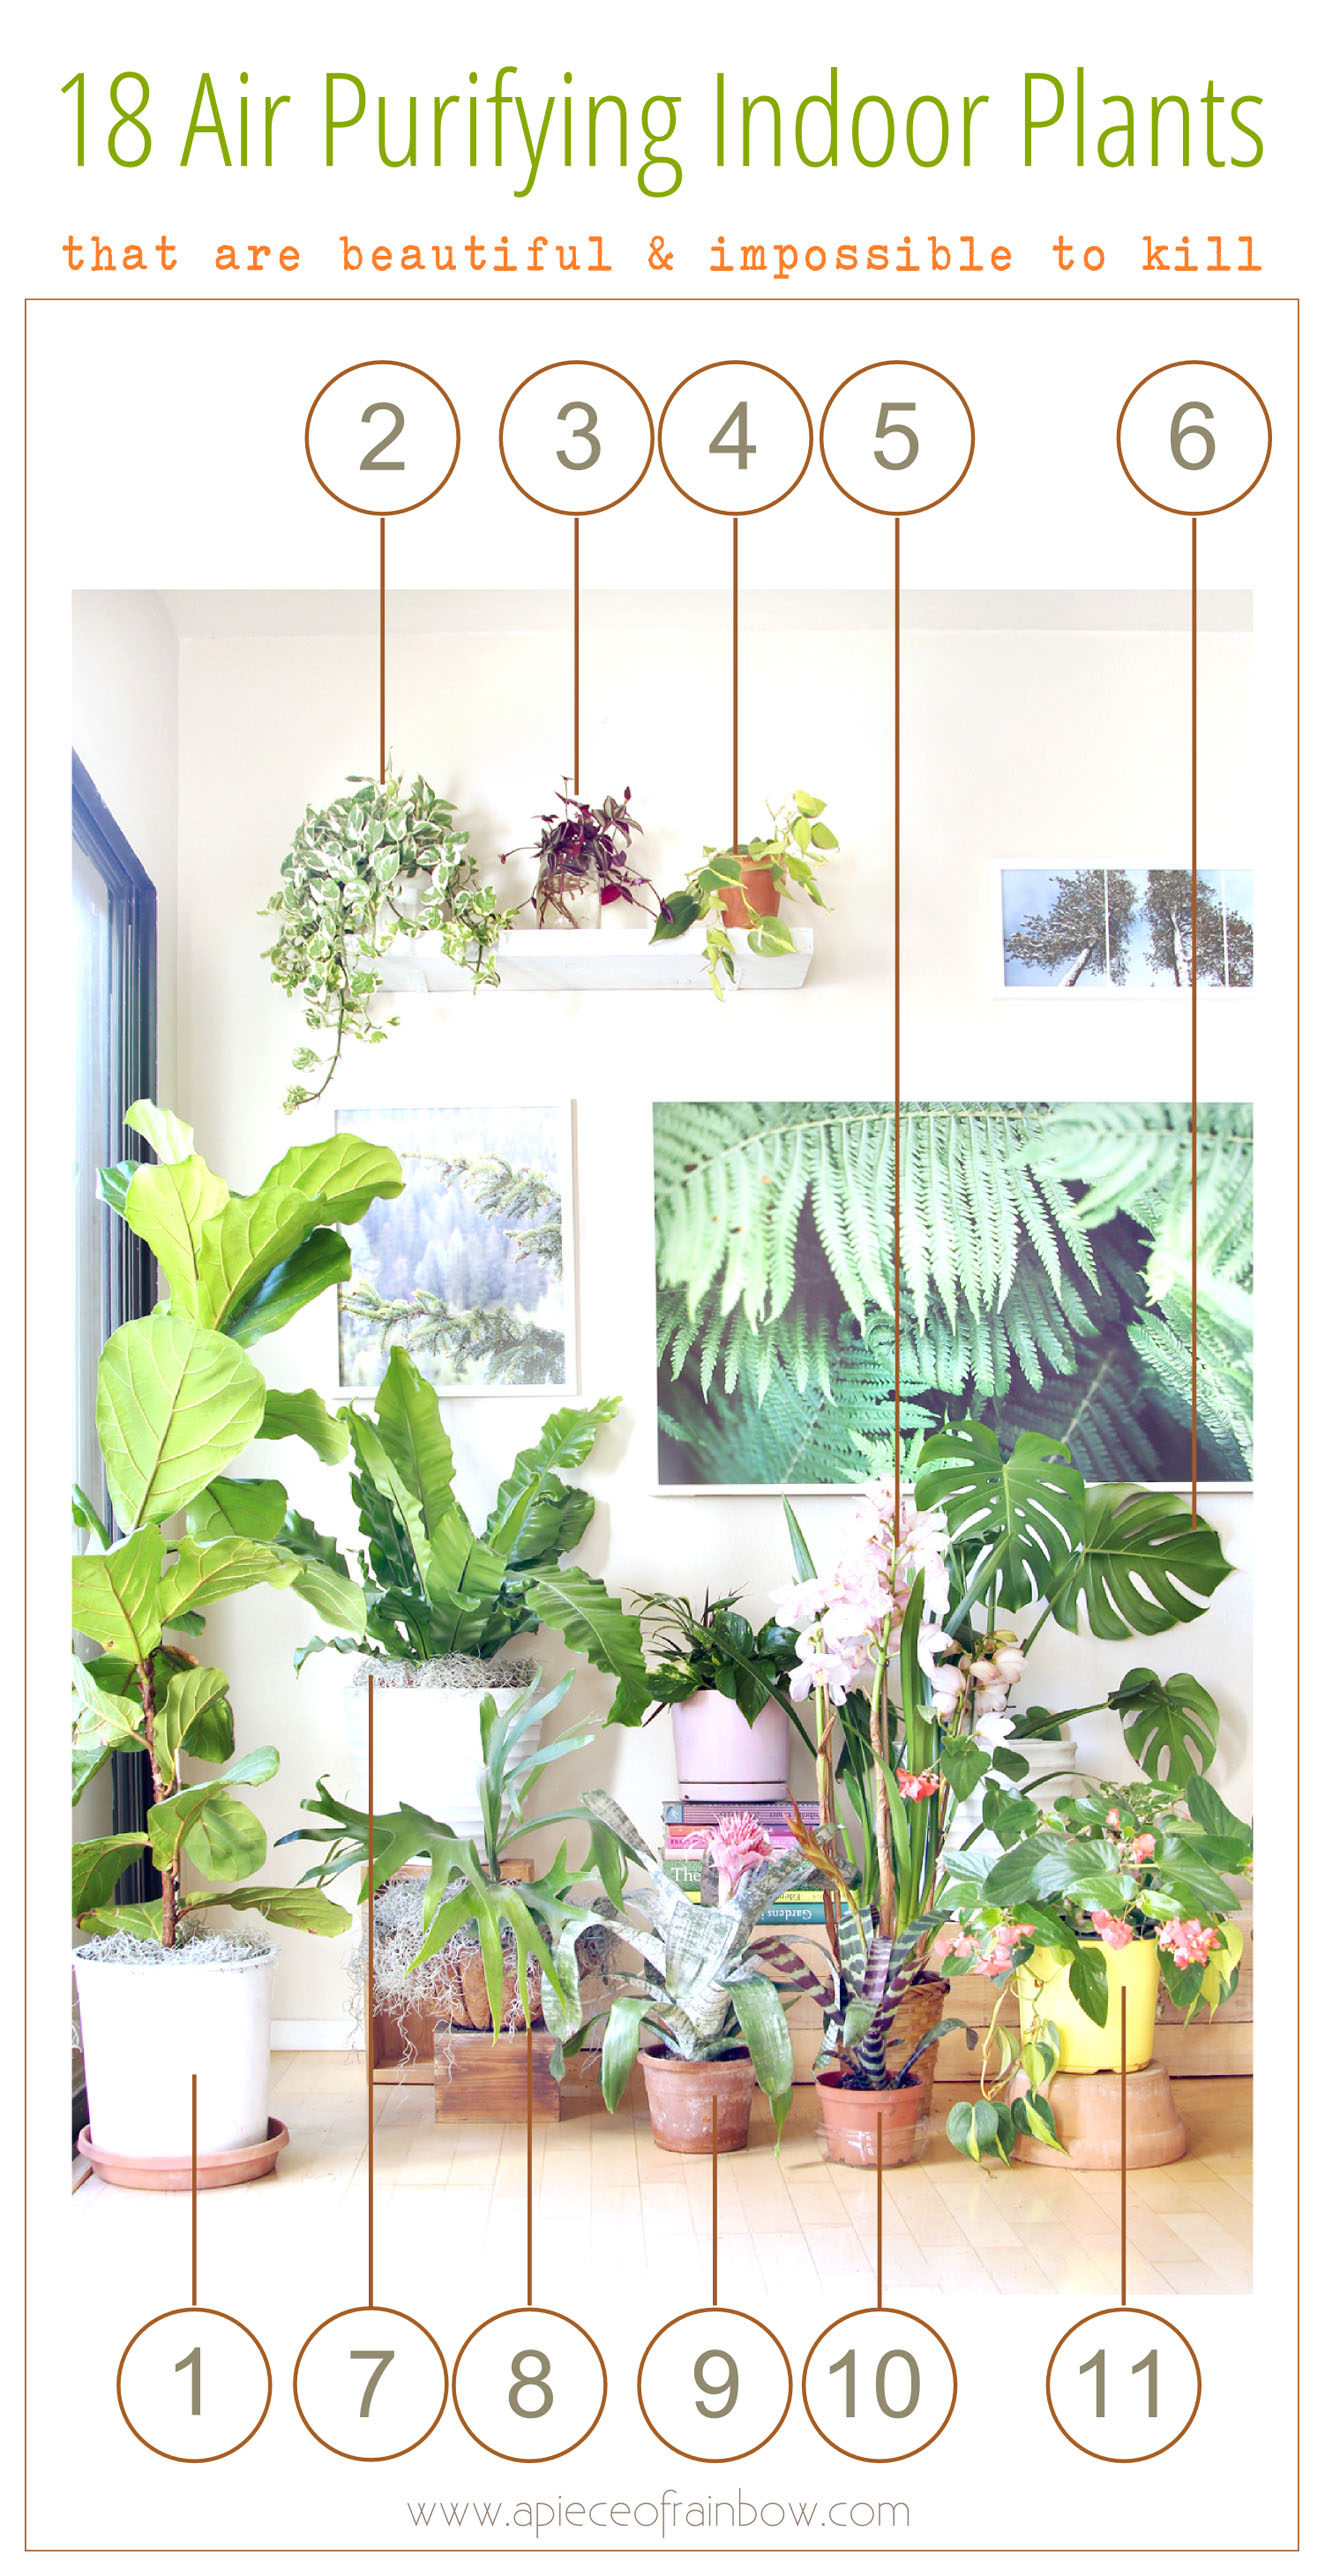 18 Most Beautiful Indoor Plants 5 Easy Care Tips A Piece Of Rainbow